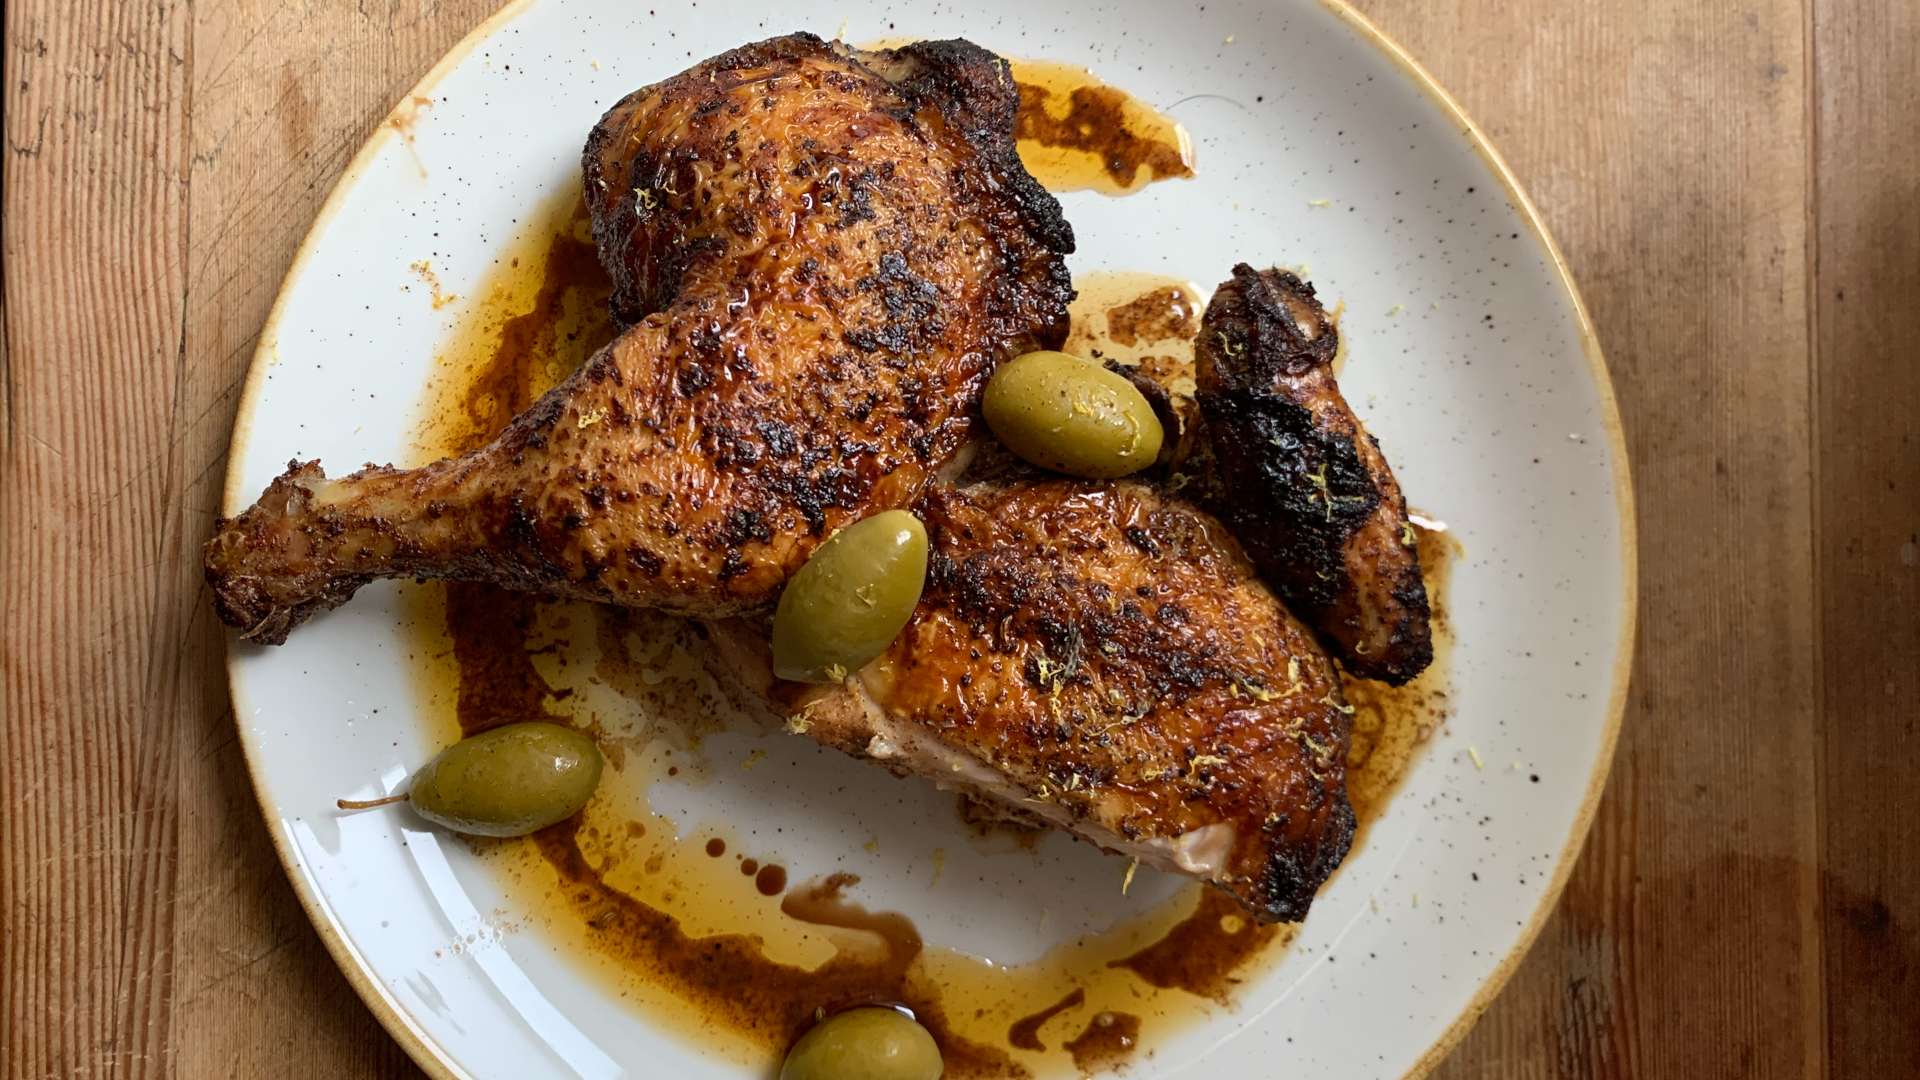 Moroccan spiced chicken with olives and lemon